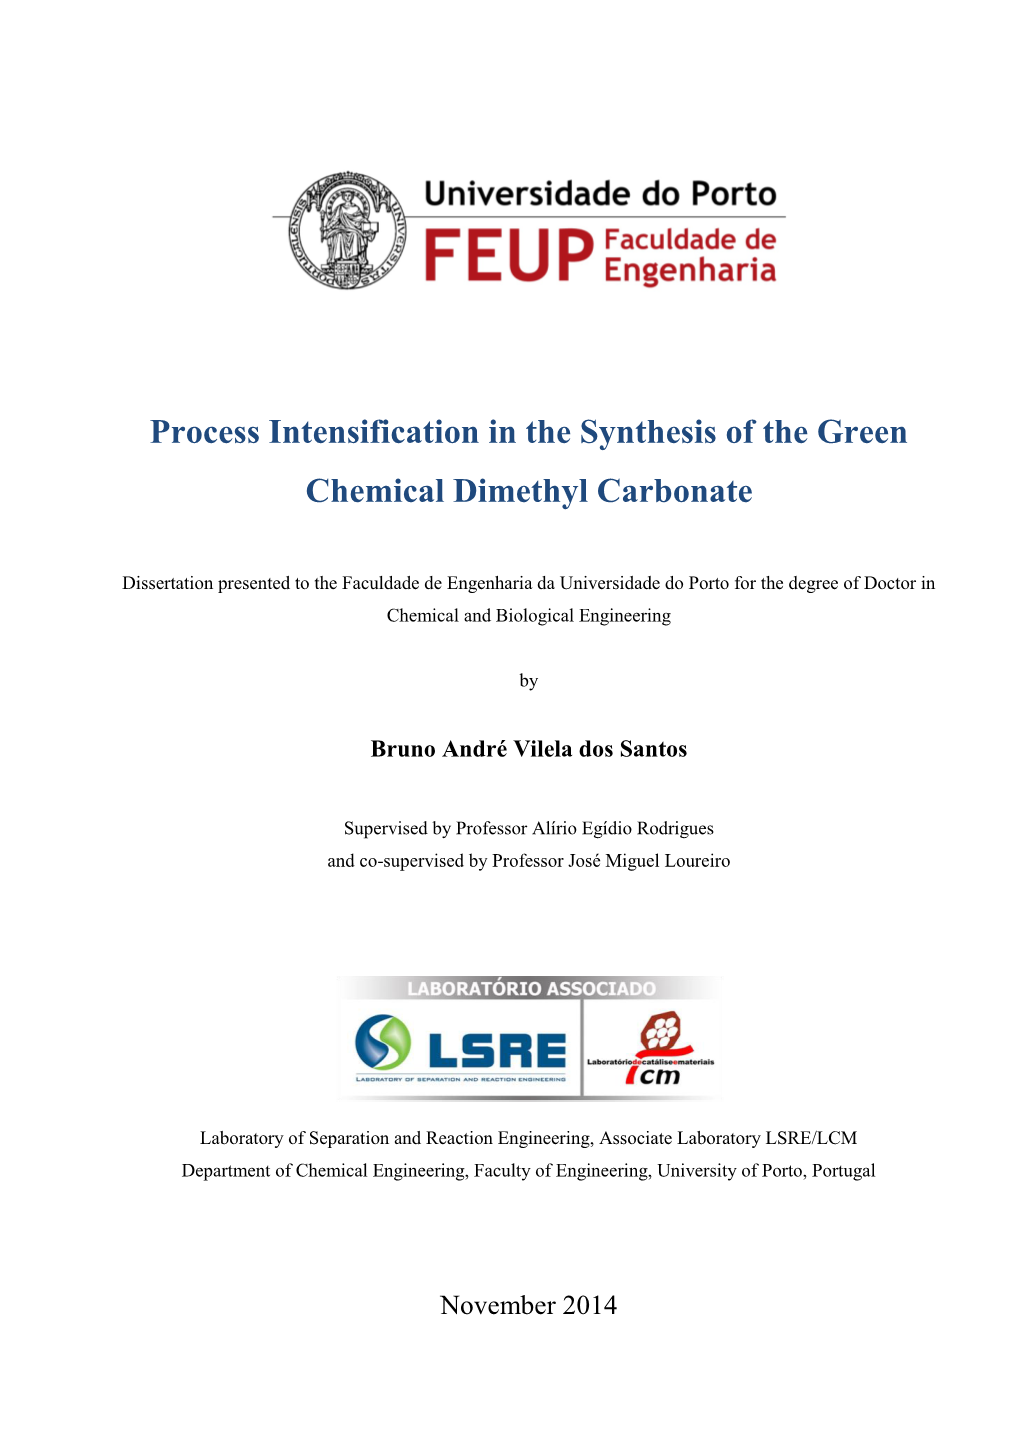 Process Intensification in the Synthesis of the Green Chemical Dimethyl Carbonate